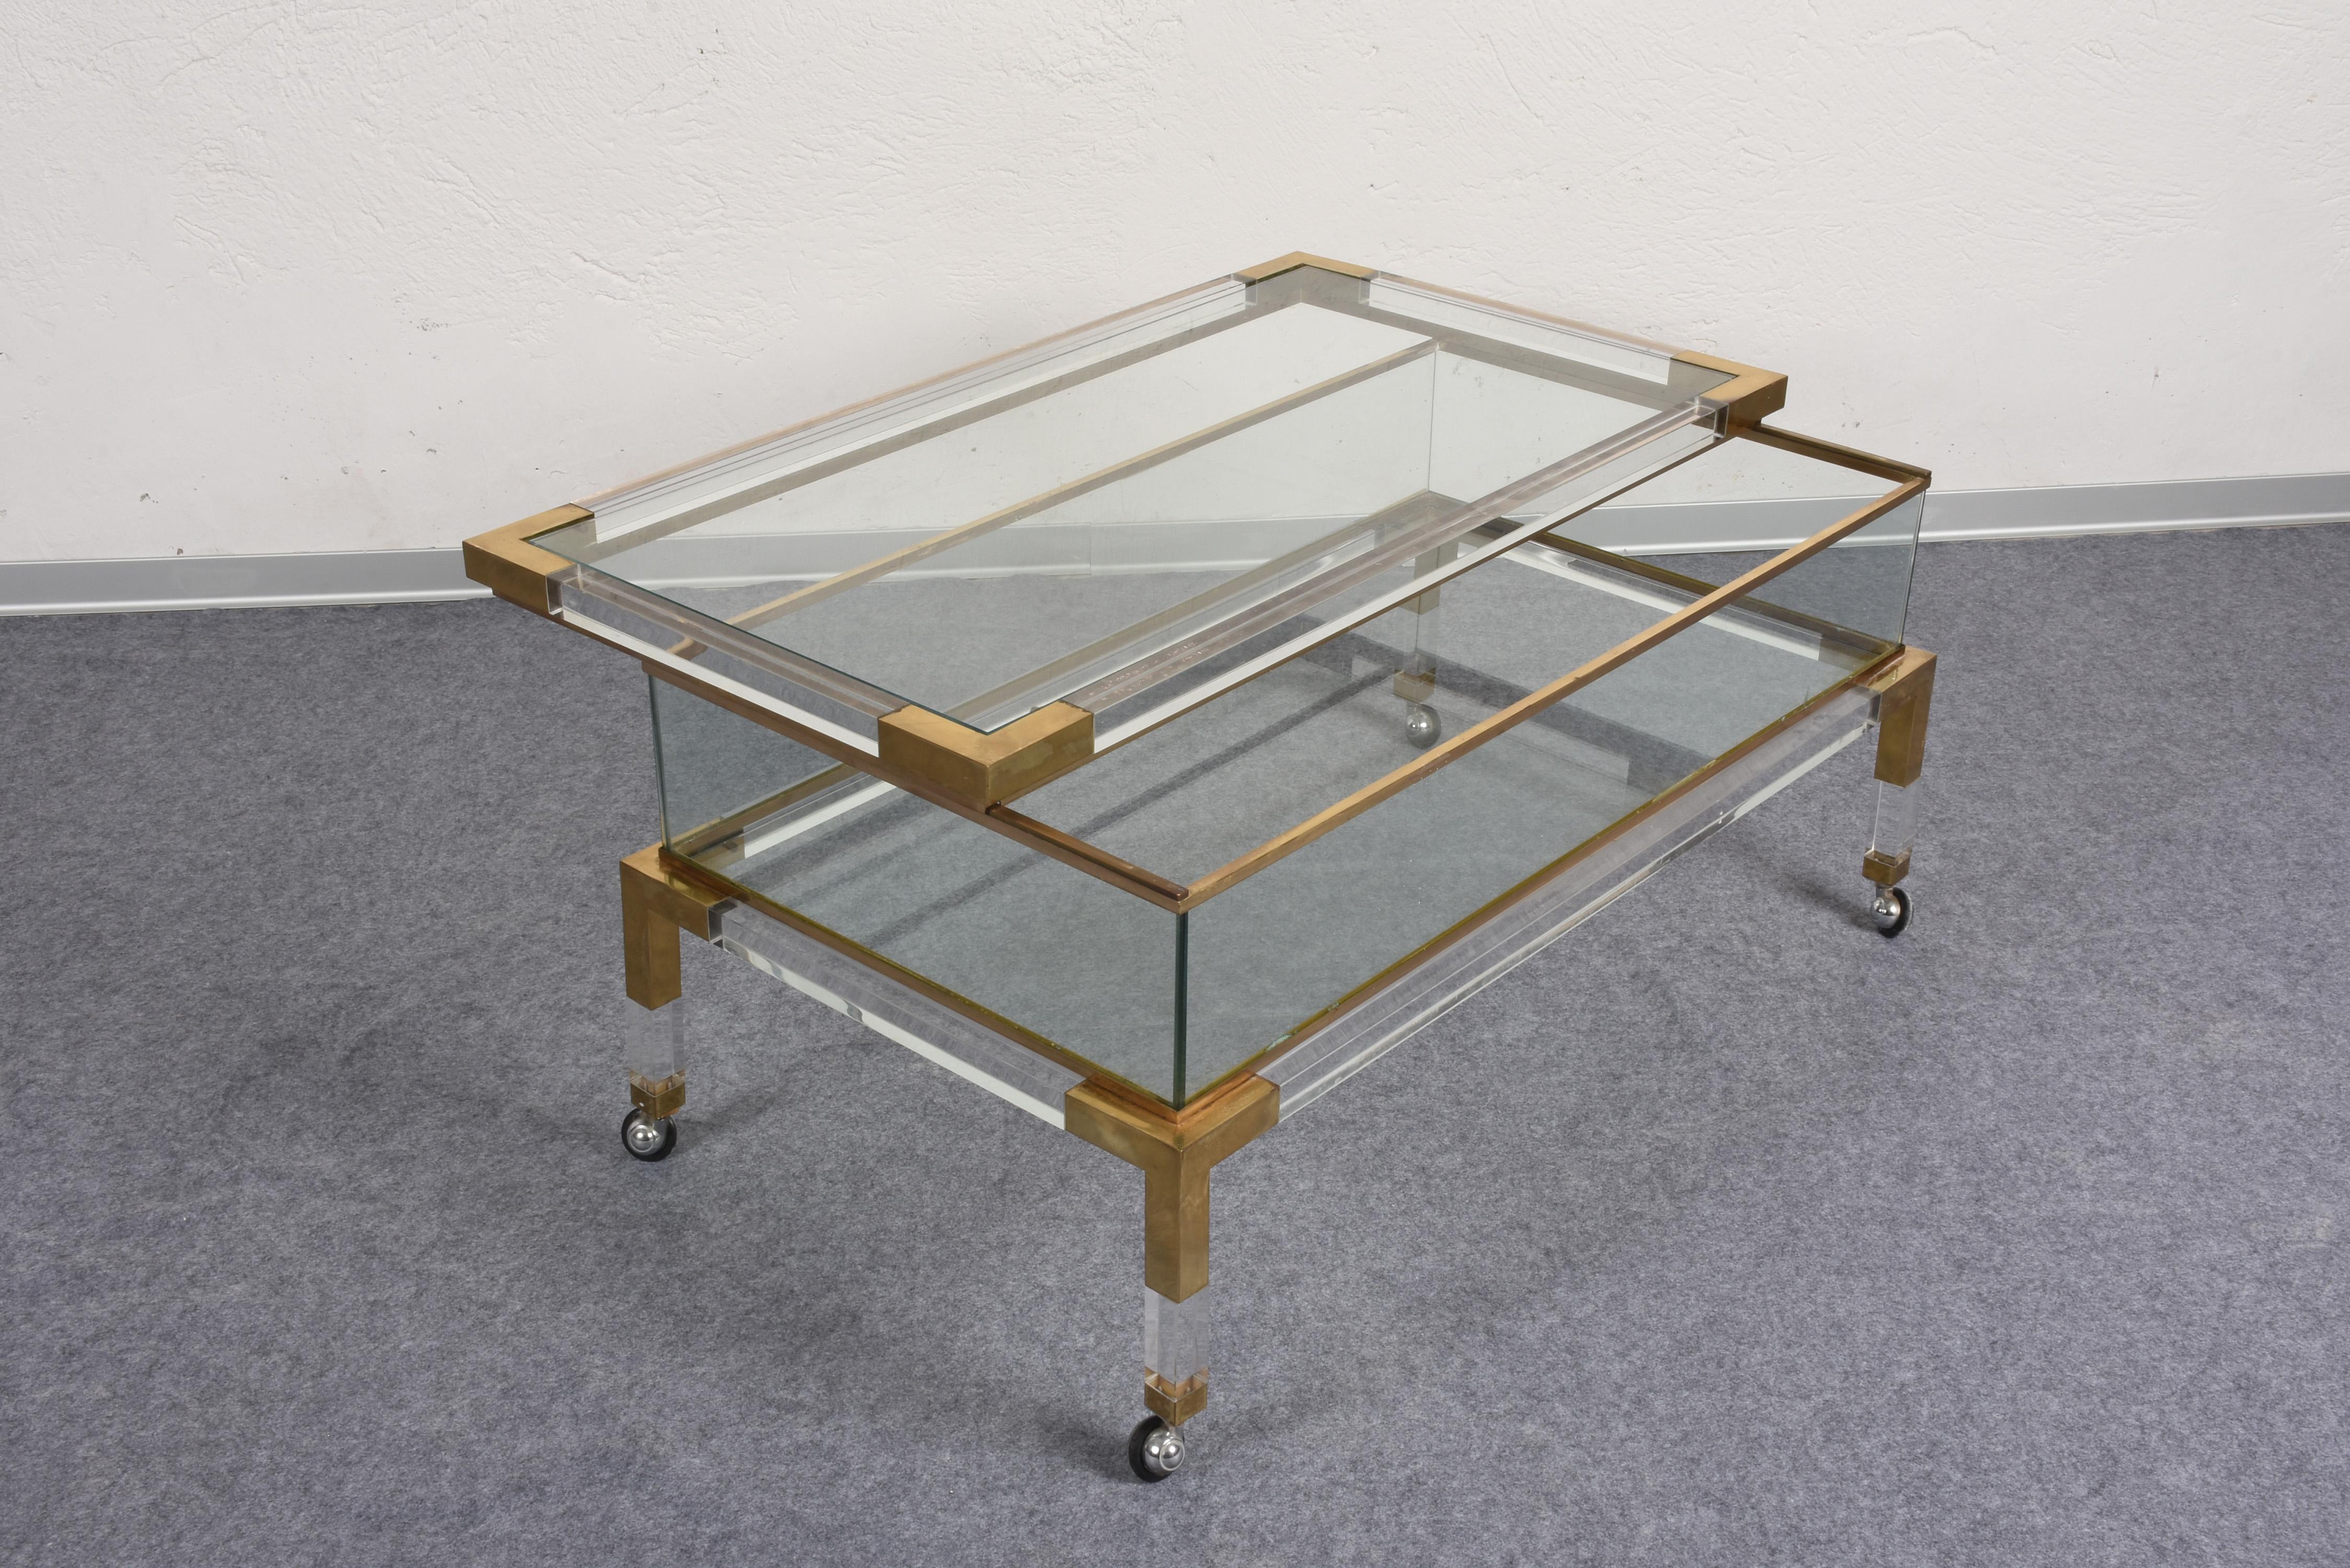 Beautiful midcentury brass and lucite coffee table with sliding shelf and four removable wheels. This fantastic piece was designed by Maison Jansen in France during the 1970s. 

This amazing item is in good condition and has a two-glass top and